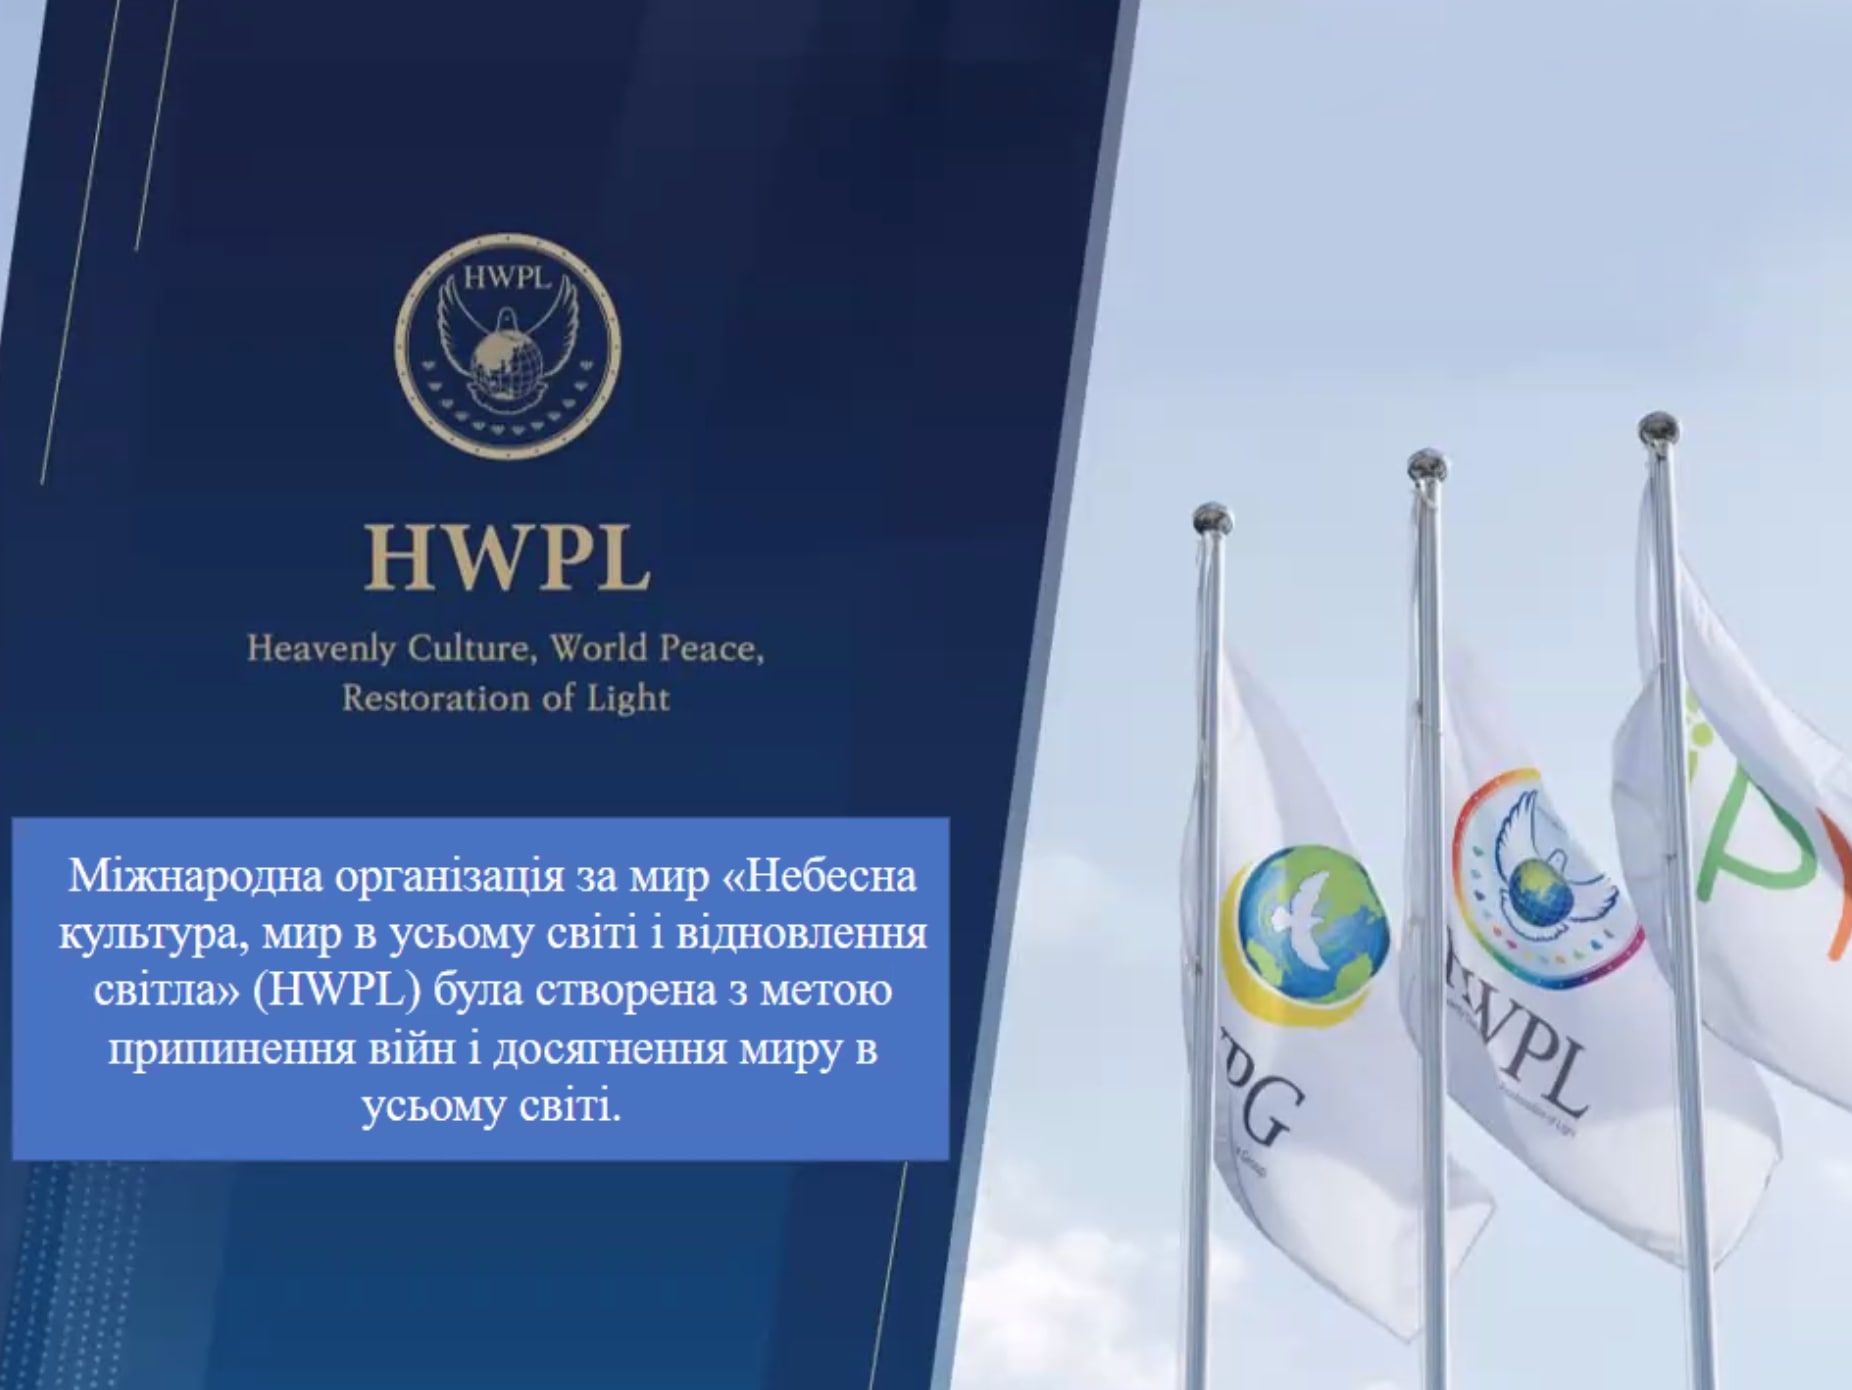 Online meeting with the coordinator of the international peace organisation HWPL